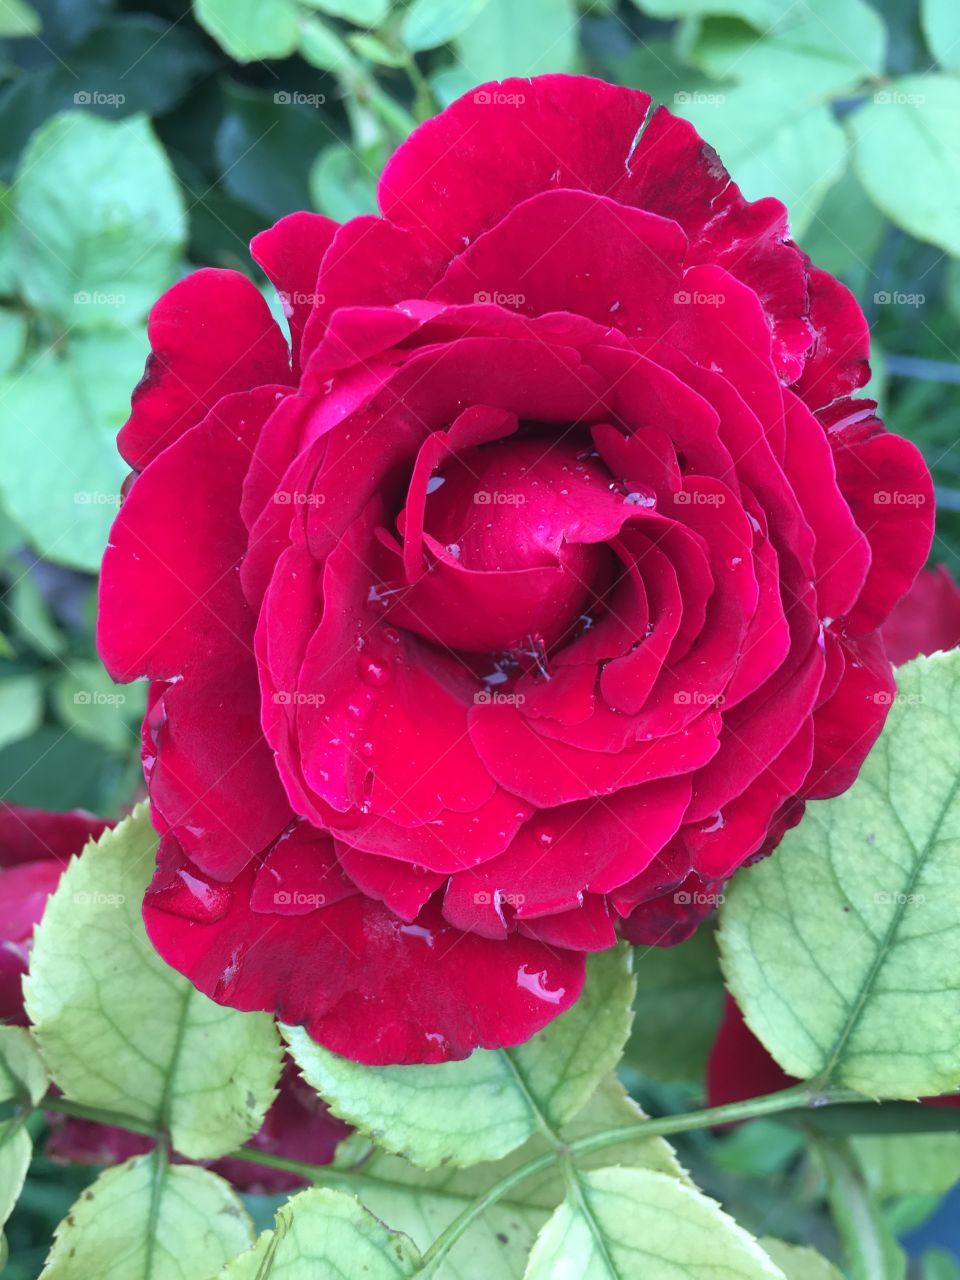 Water droplets on a rose
